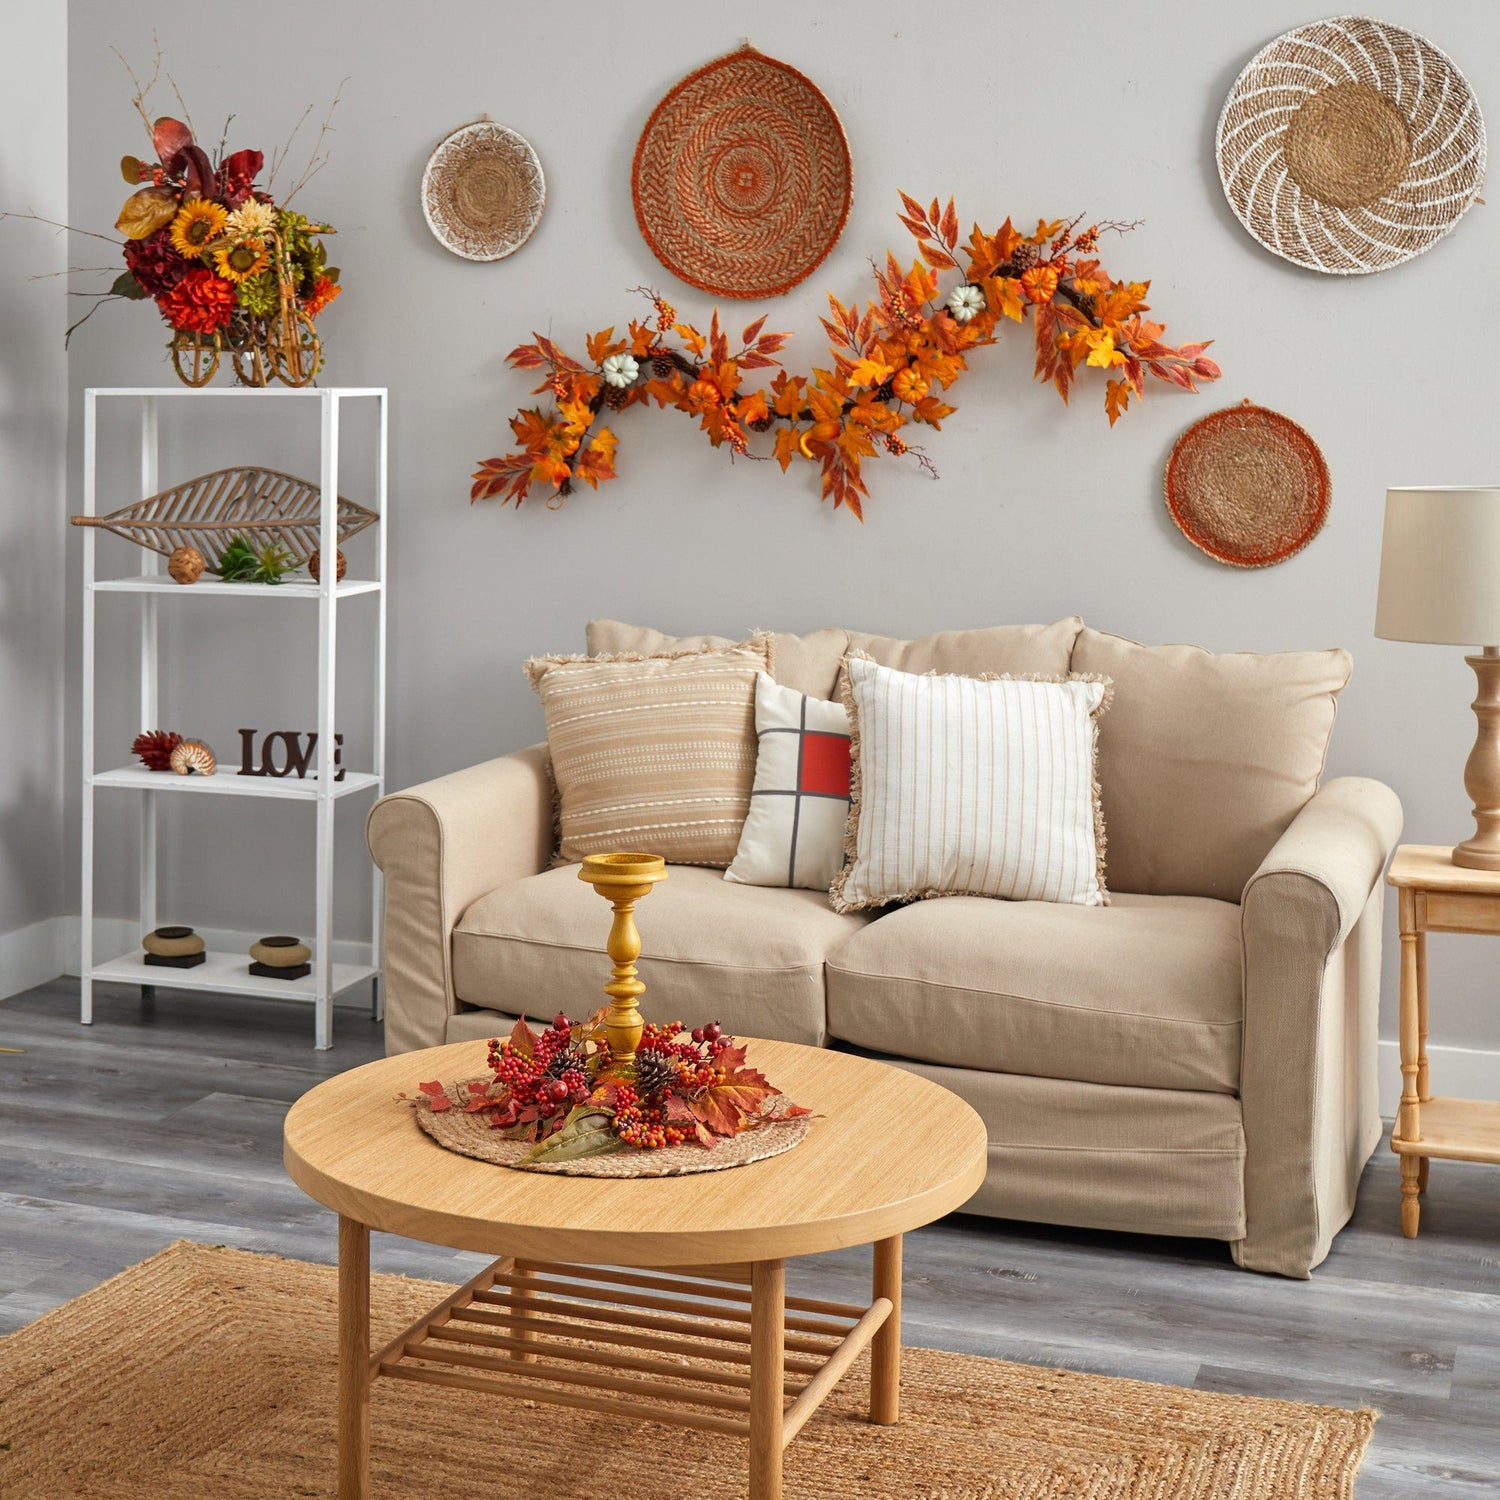 6’ Assorted Autumn Maple Leaves, Pumpkins, Gourds, Berries and Pinecone Artificial Fall Garland